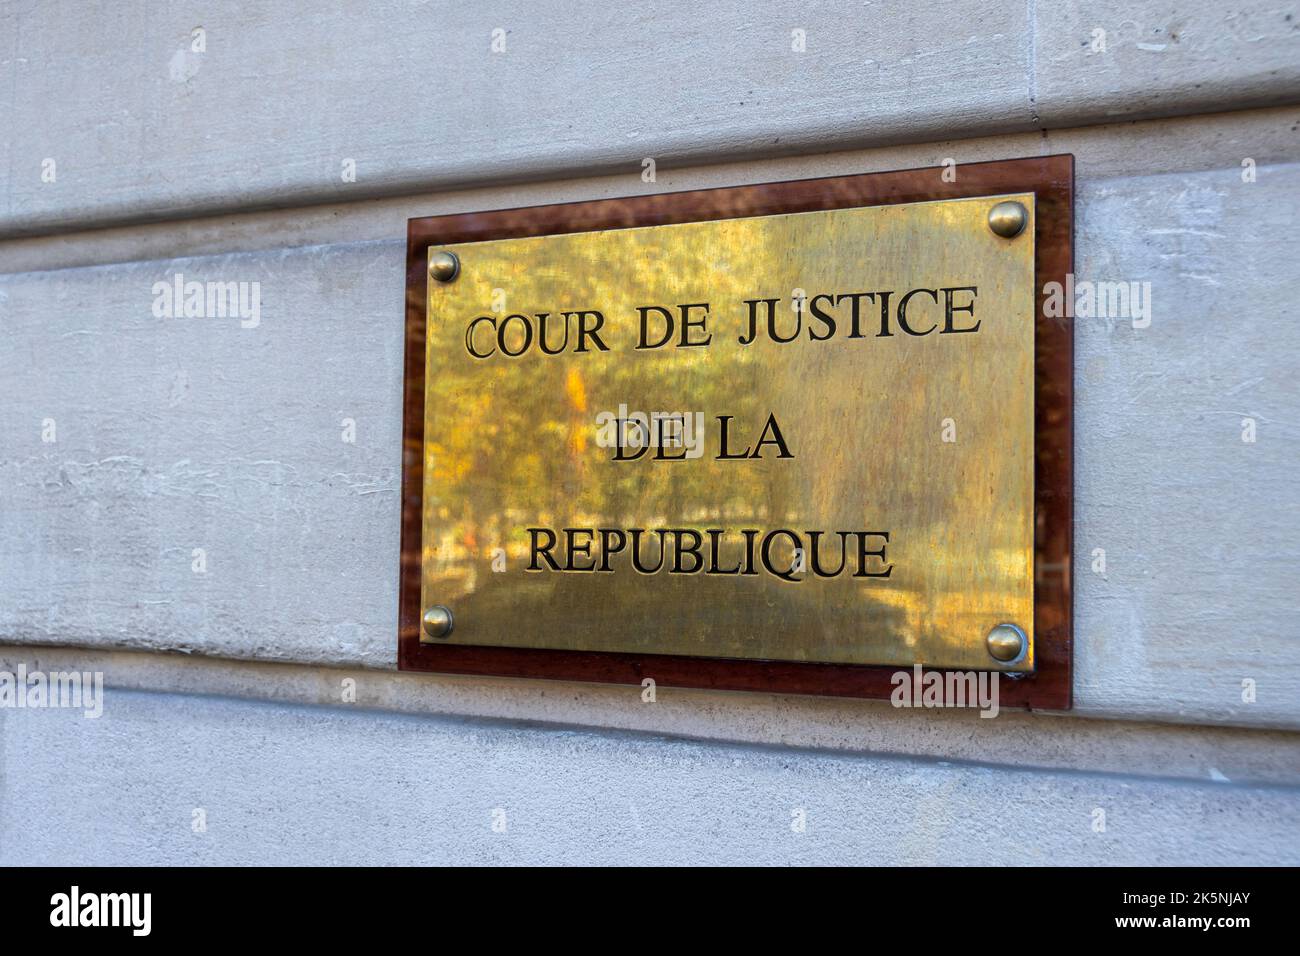 Plaque at the entrance to the Cour de Justice de la République, a French jurisdiction competent to try crimes committed by members of the government Stock Photo